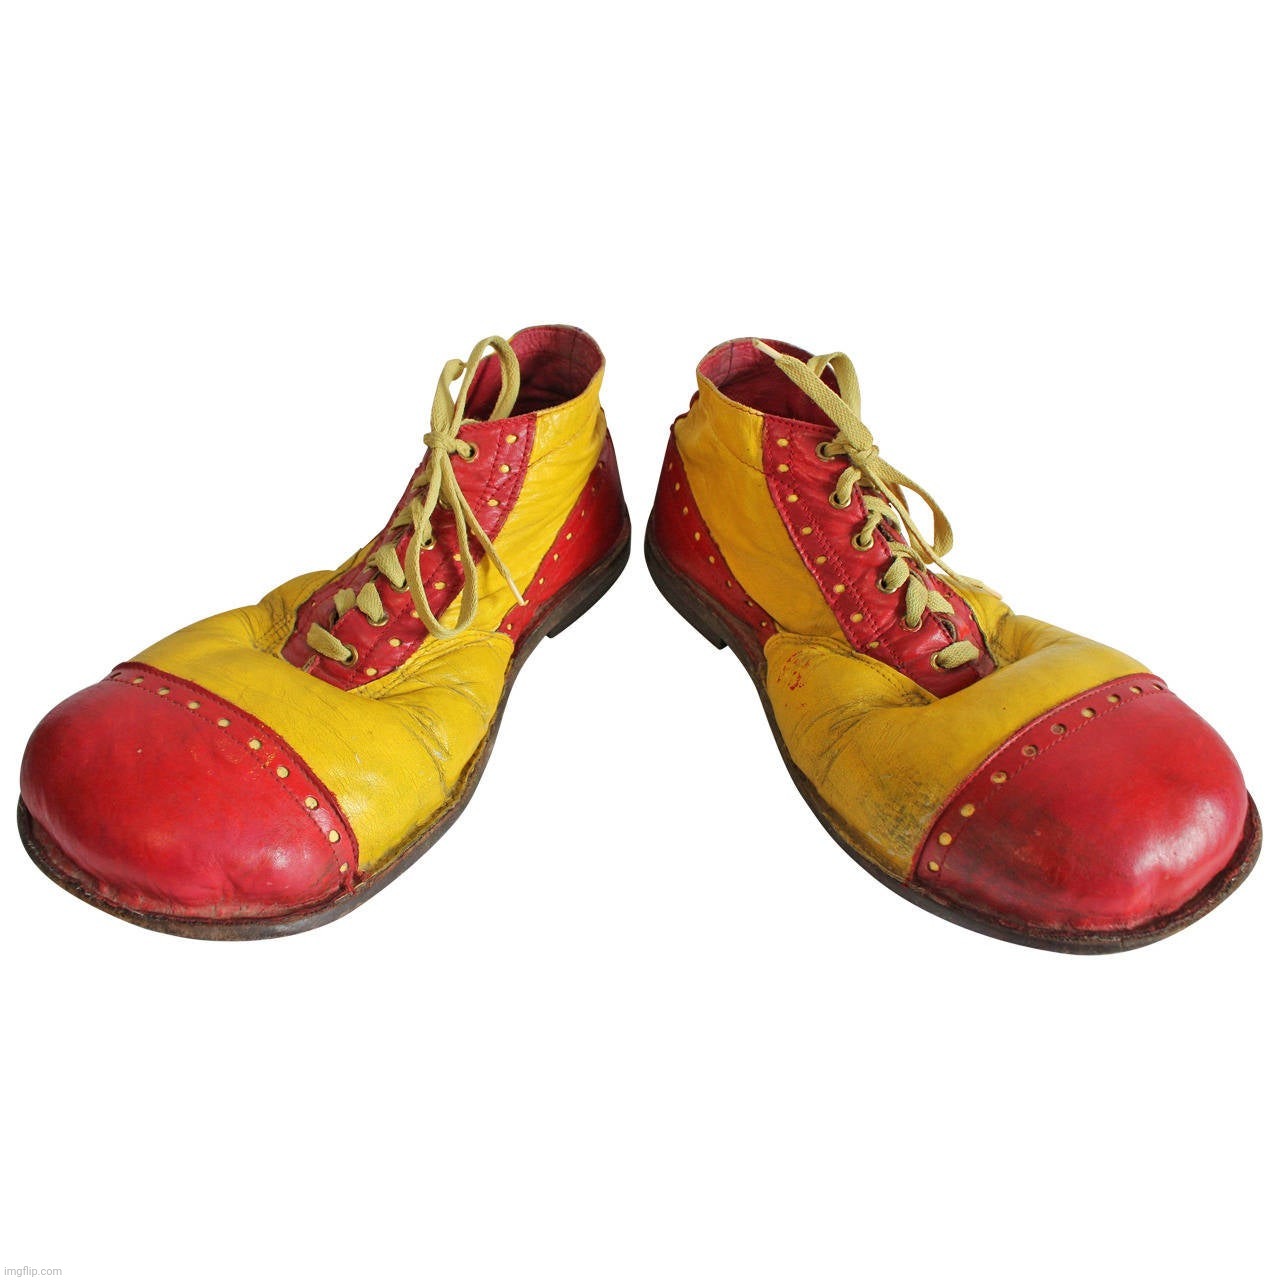 image tagged in clown shoes,mega clown shoes,trump clown shoes,trump golden sneakers,trump,maga | made w/ Imgflip meme maker